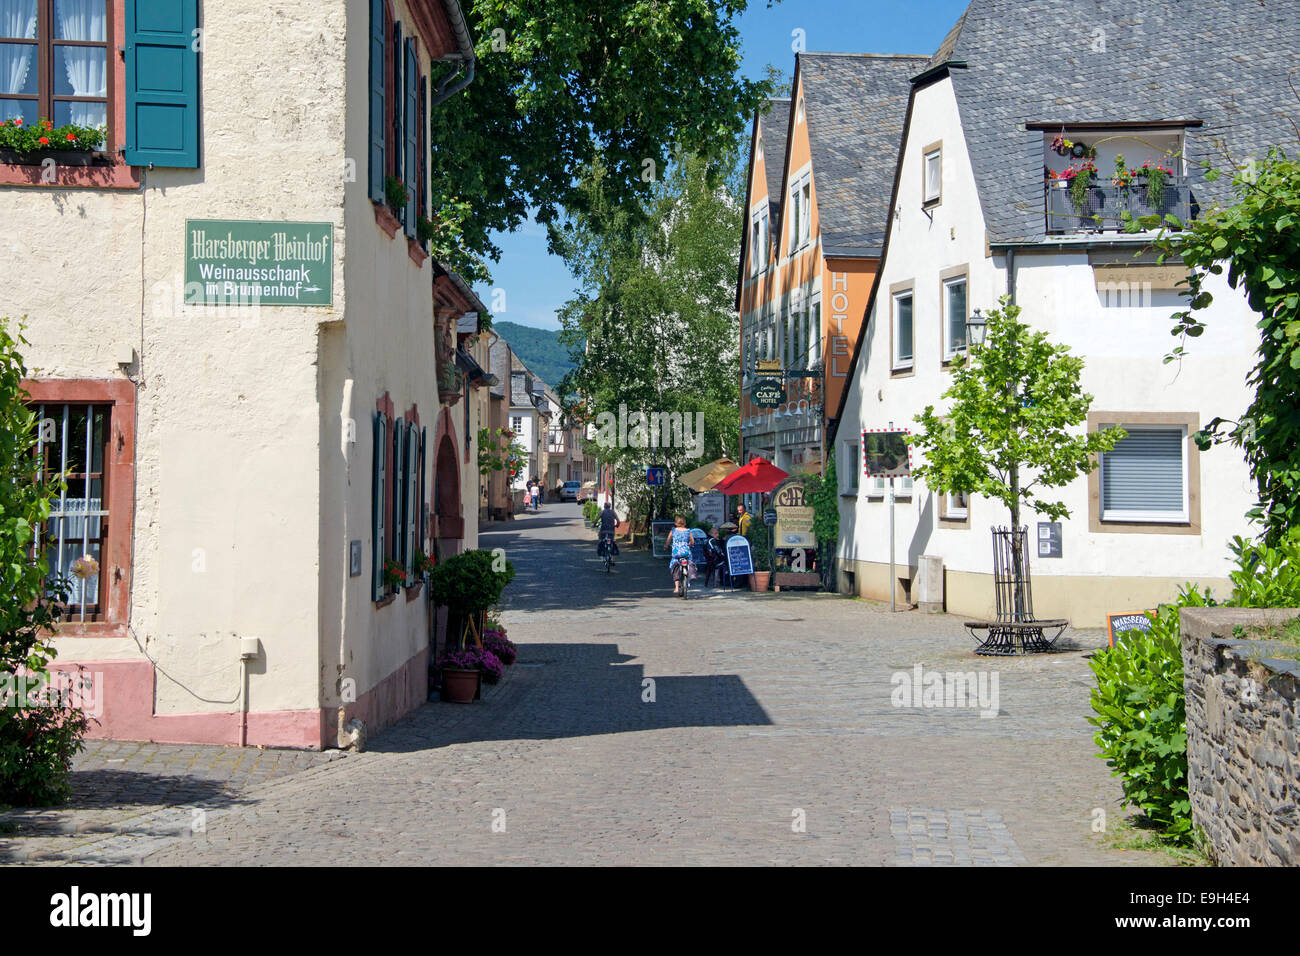 Neumagen Village Moselle Valley Germany Stock Photo